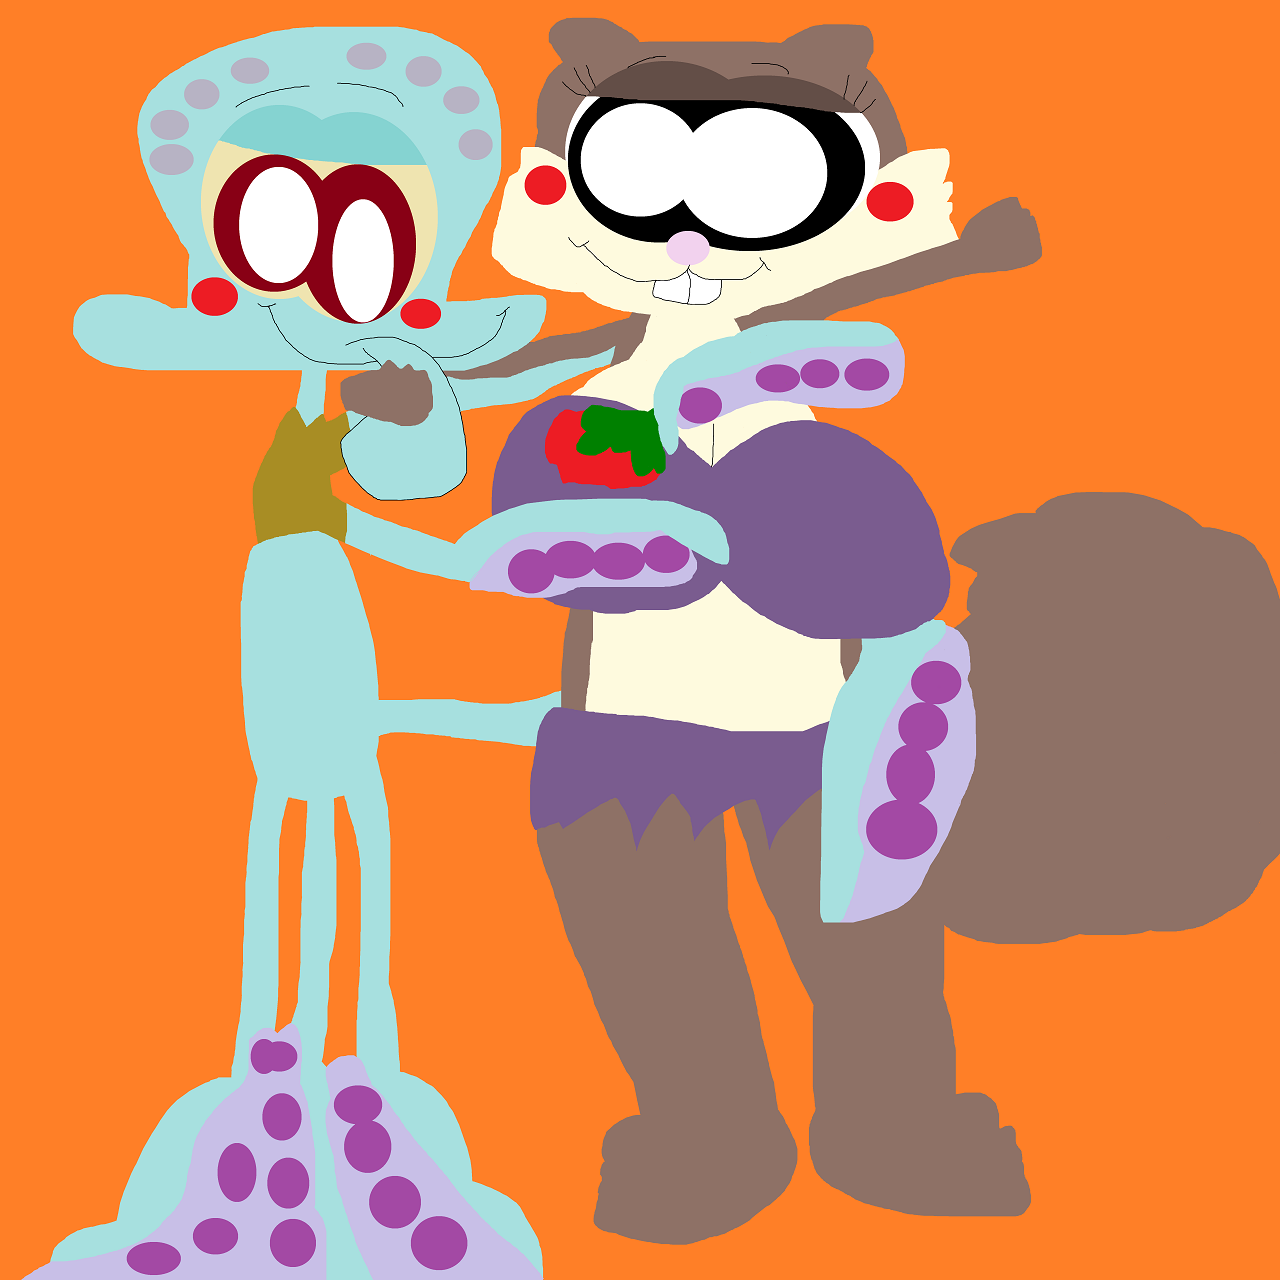 A Frisky Squidward With A Rose For Sandy by Falconlobo